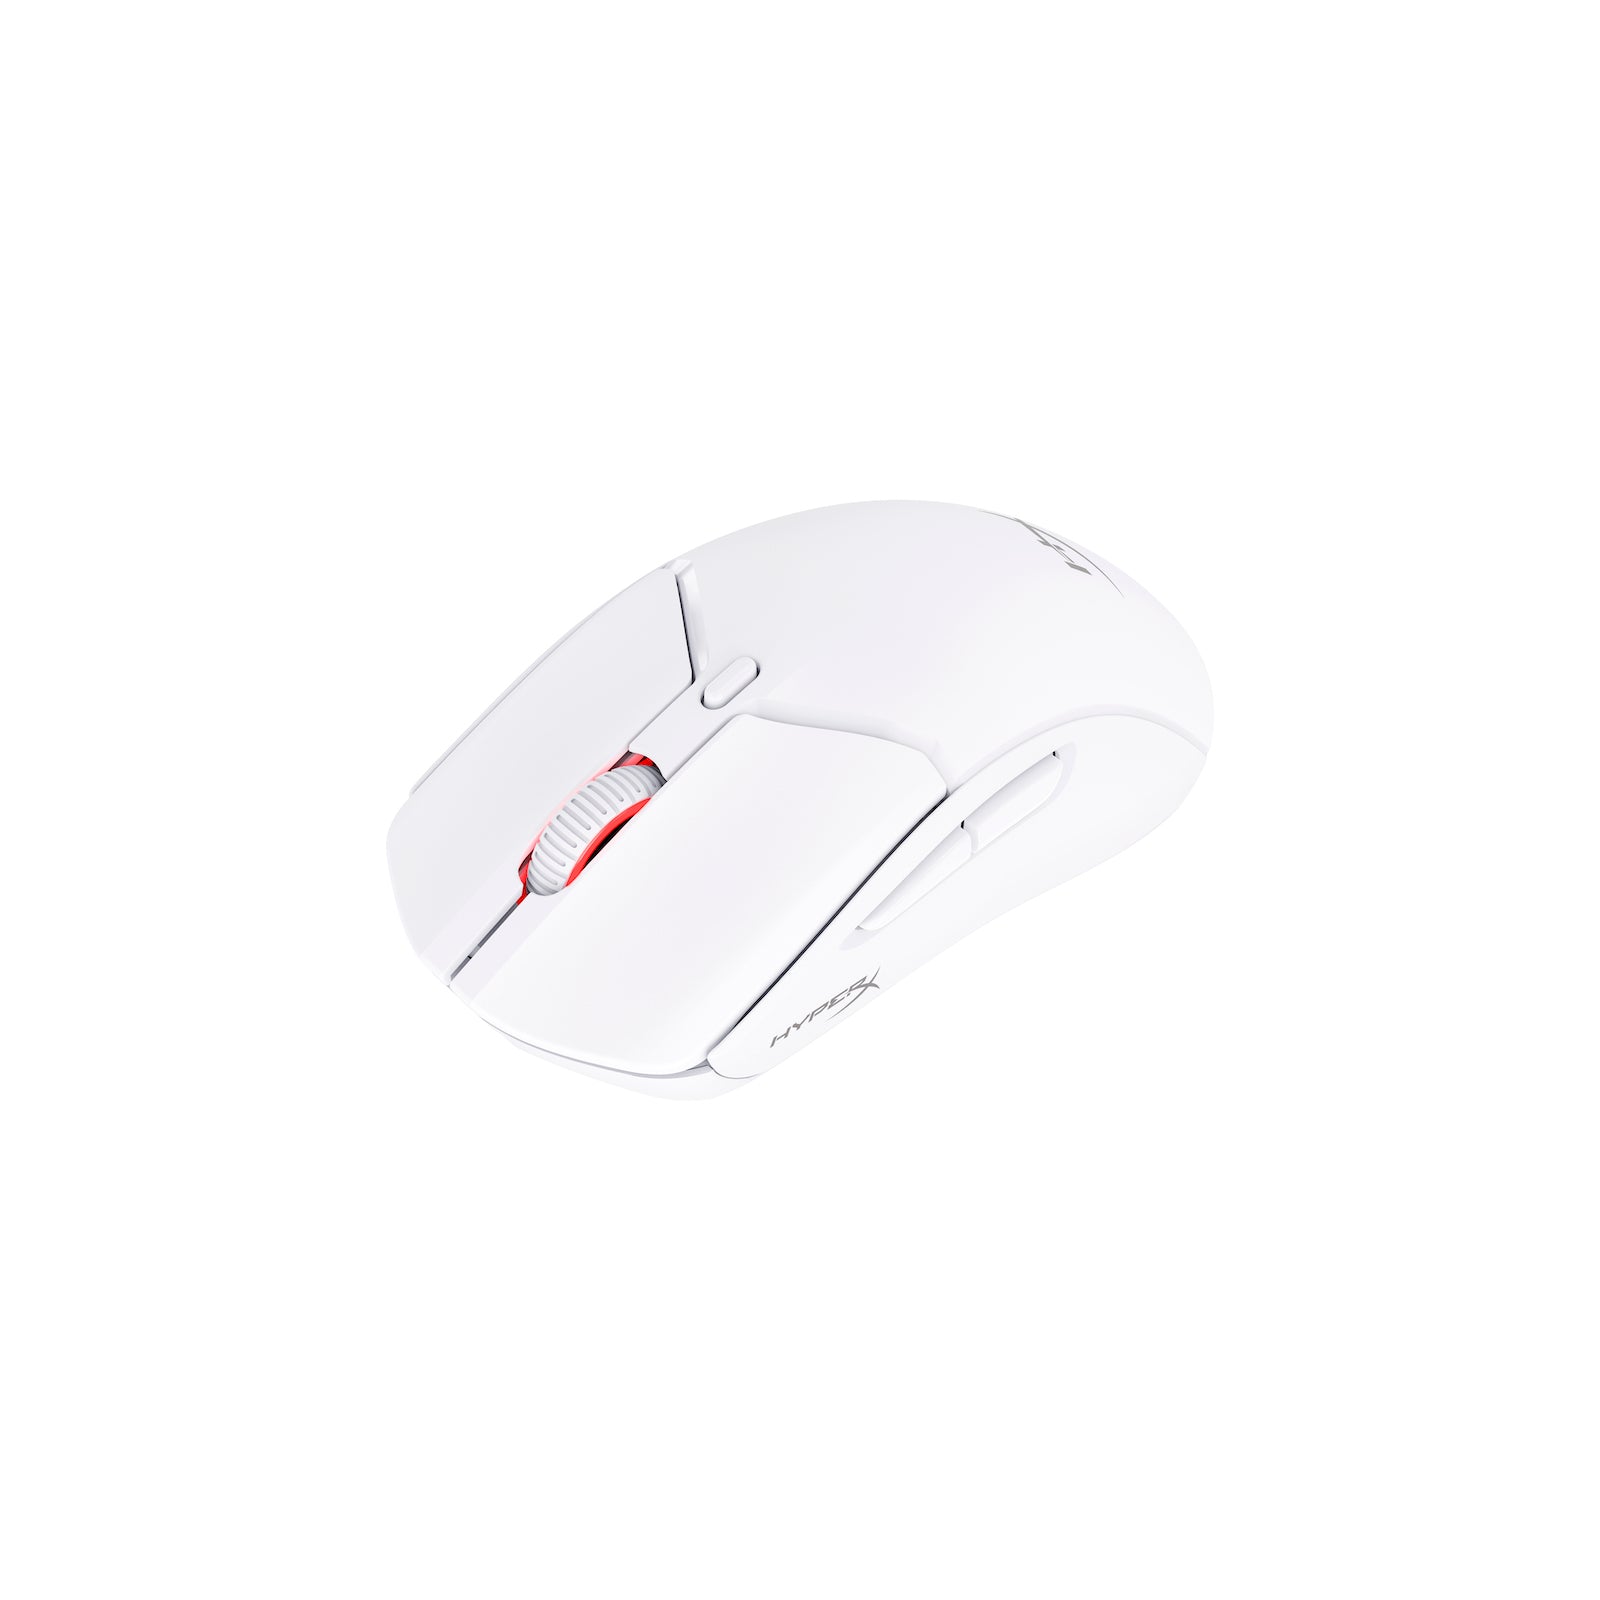 HyperX Pulsefire Haste 2 Wireless White Gaming Mouse -  angled view from the left side